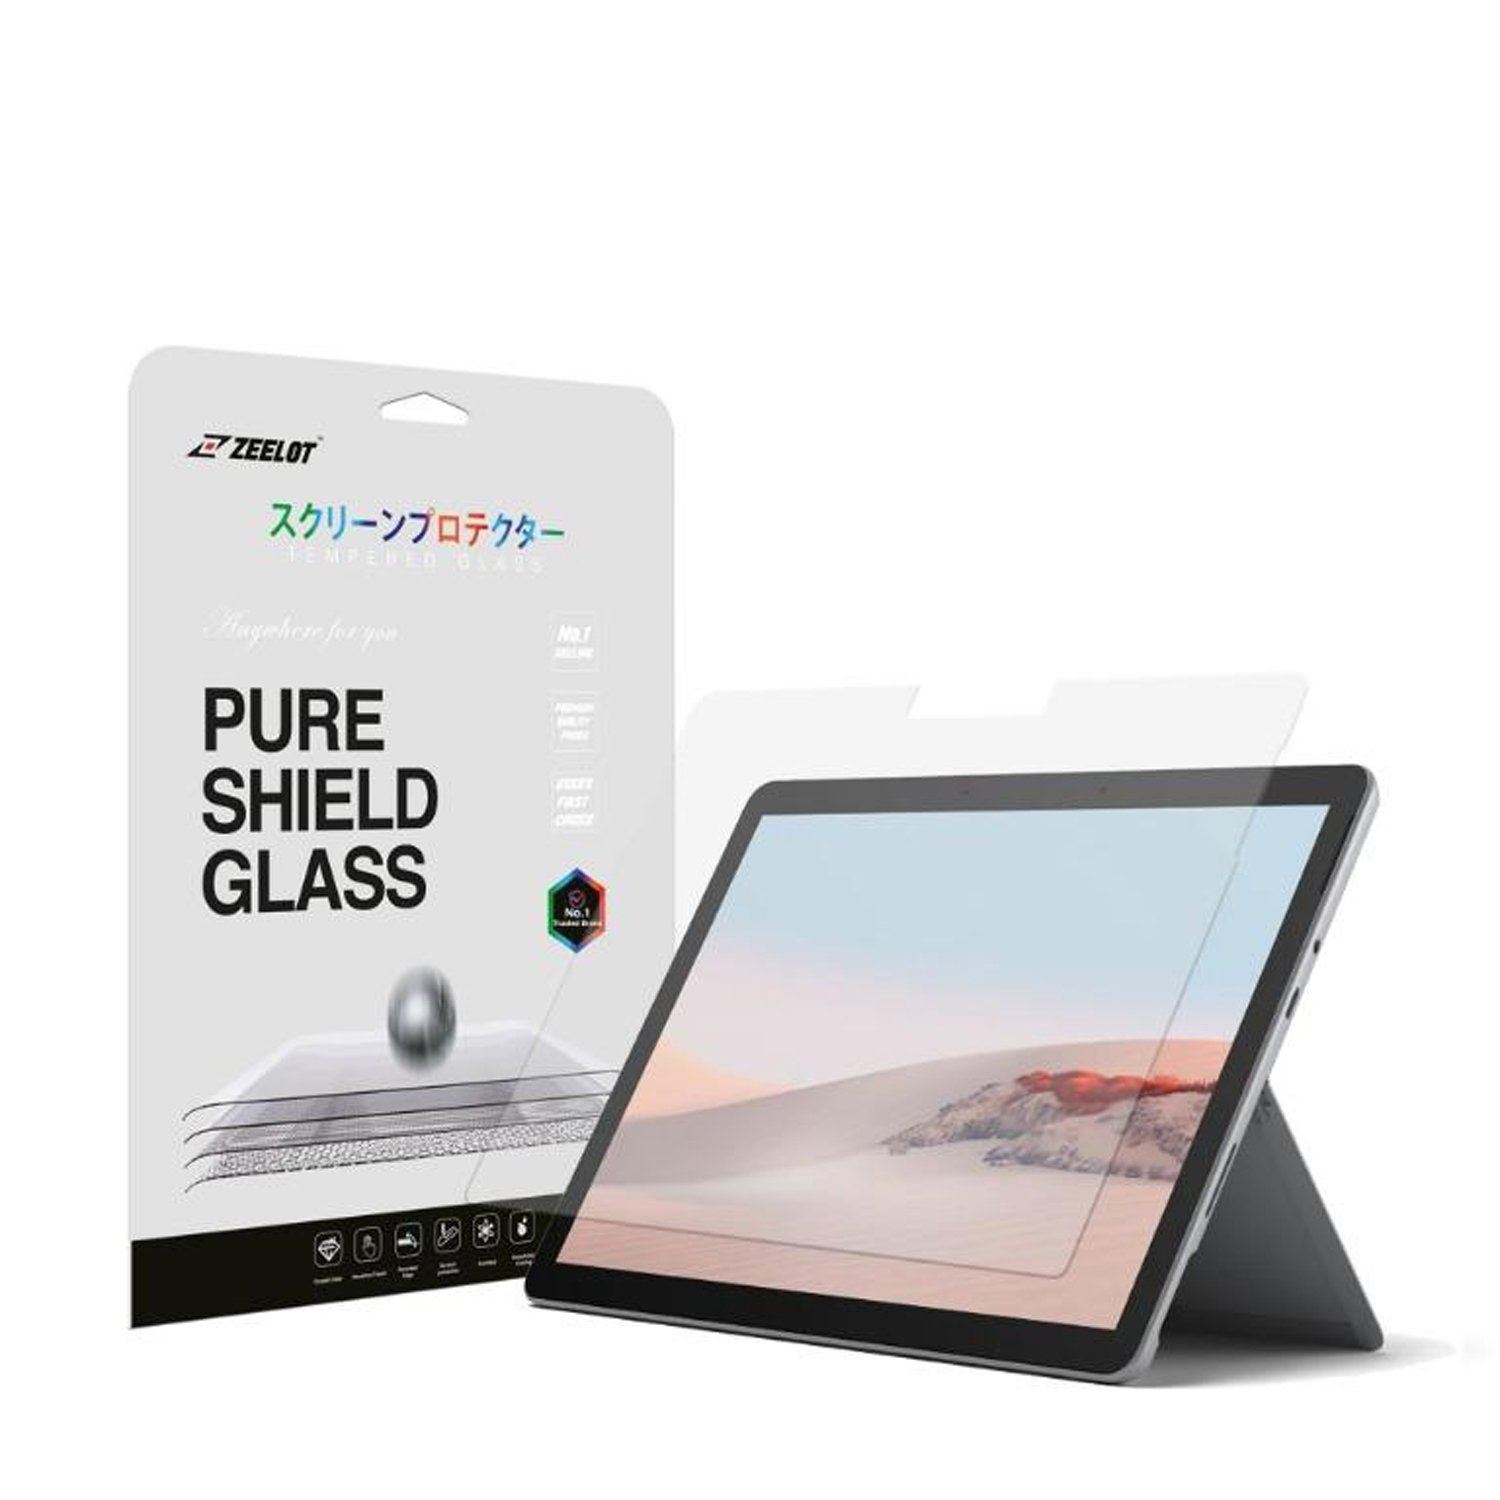 ZEELOT PureShield 2.5D Tempered Glass Screen Protector for Microsoft Surface Go 2, Clear Surface Go ZEELOT 